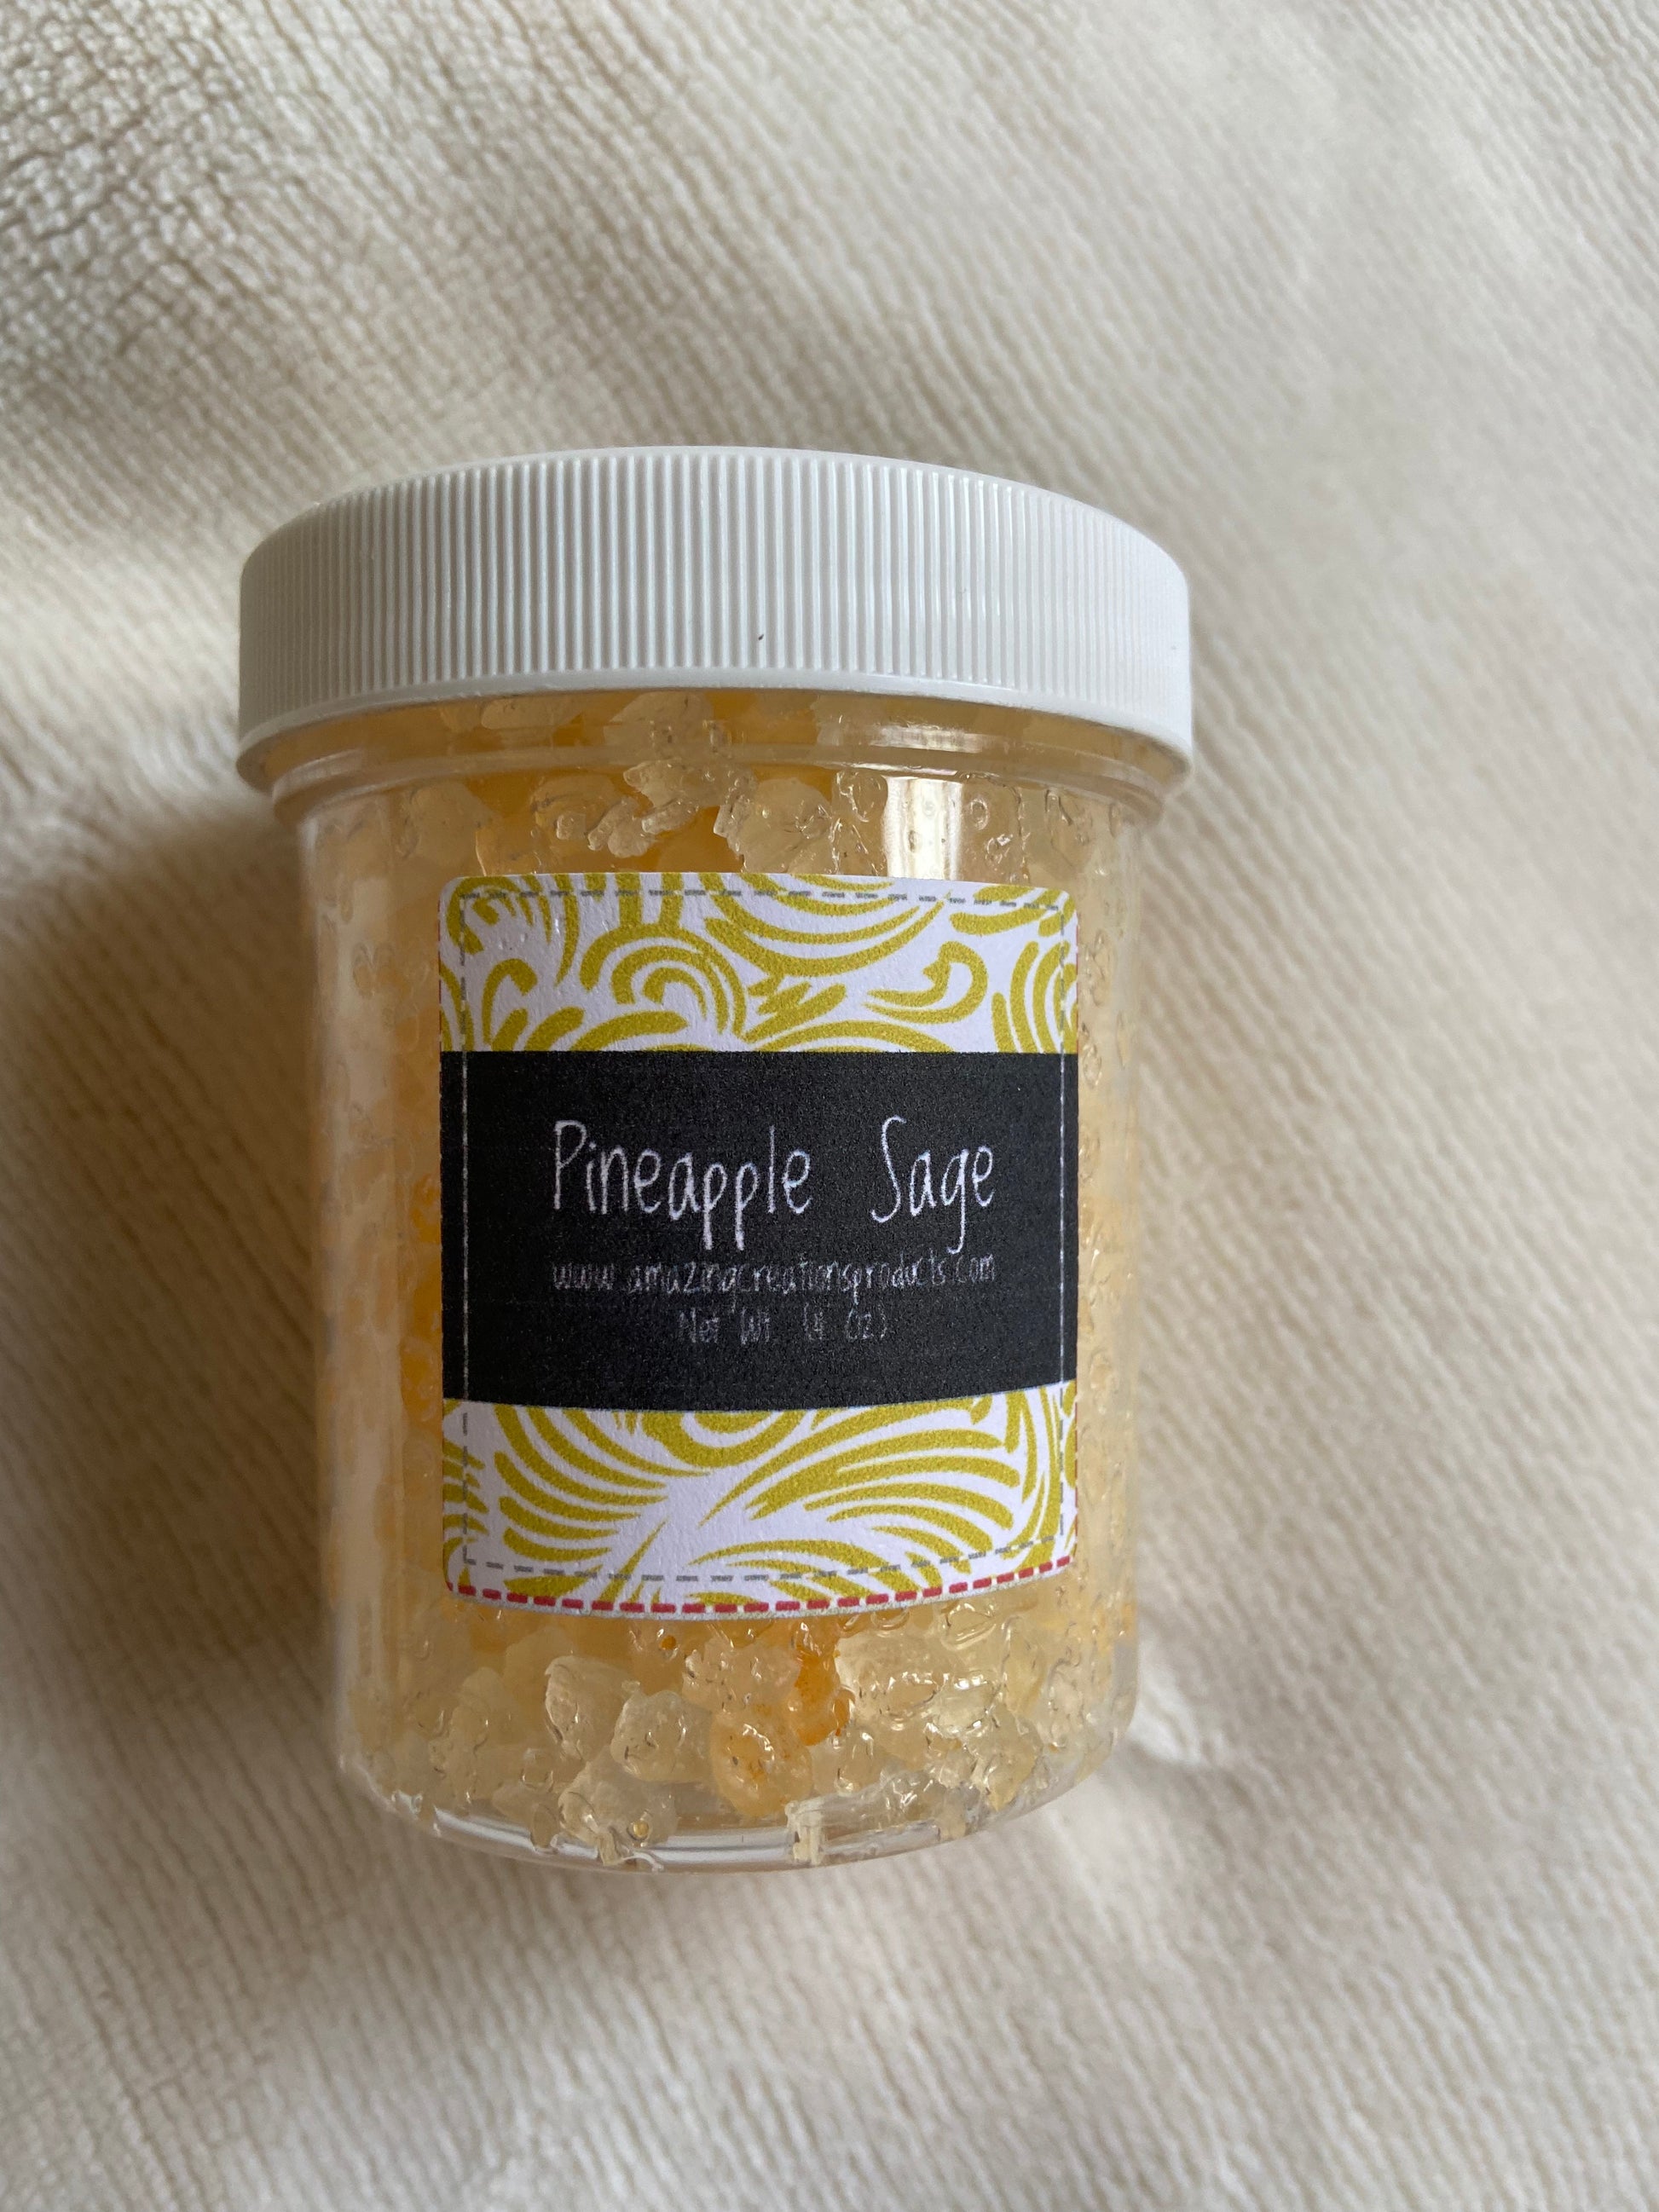  Pineapple Sage Bath Salt - Bath Salts available at Amazing Creations Products . Grab yours for $10.00 today!